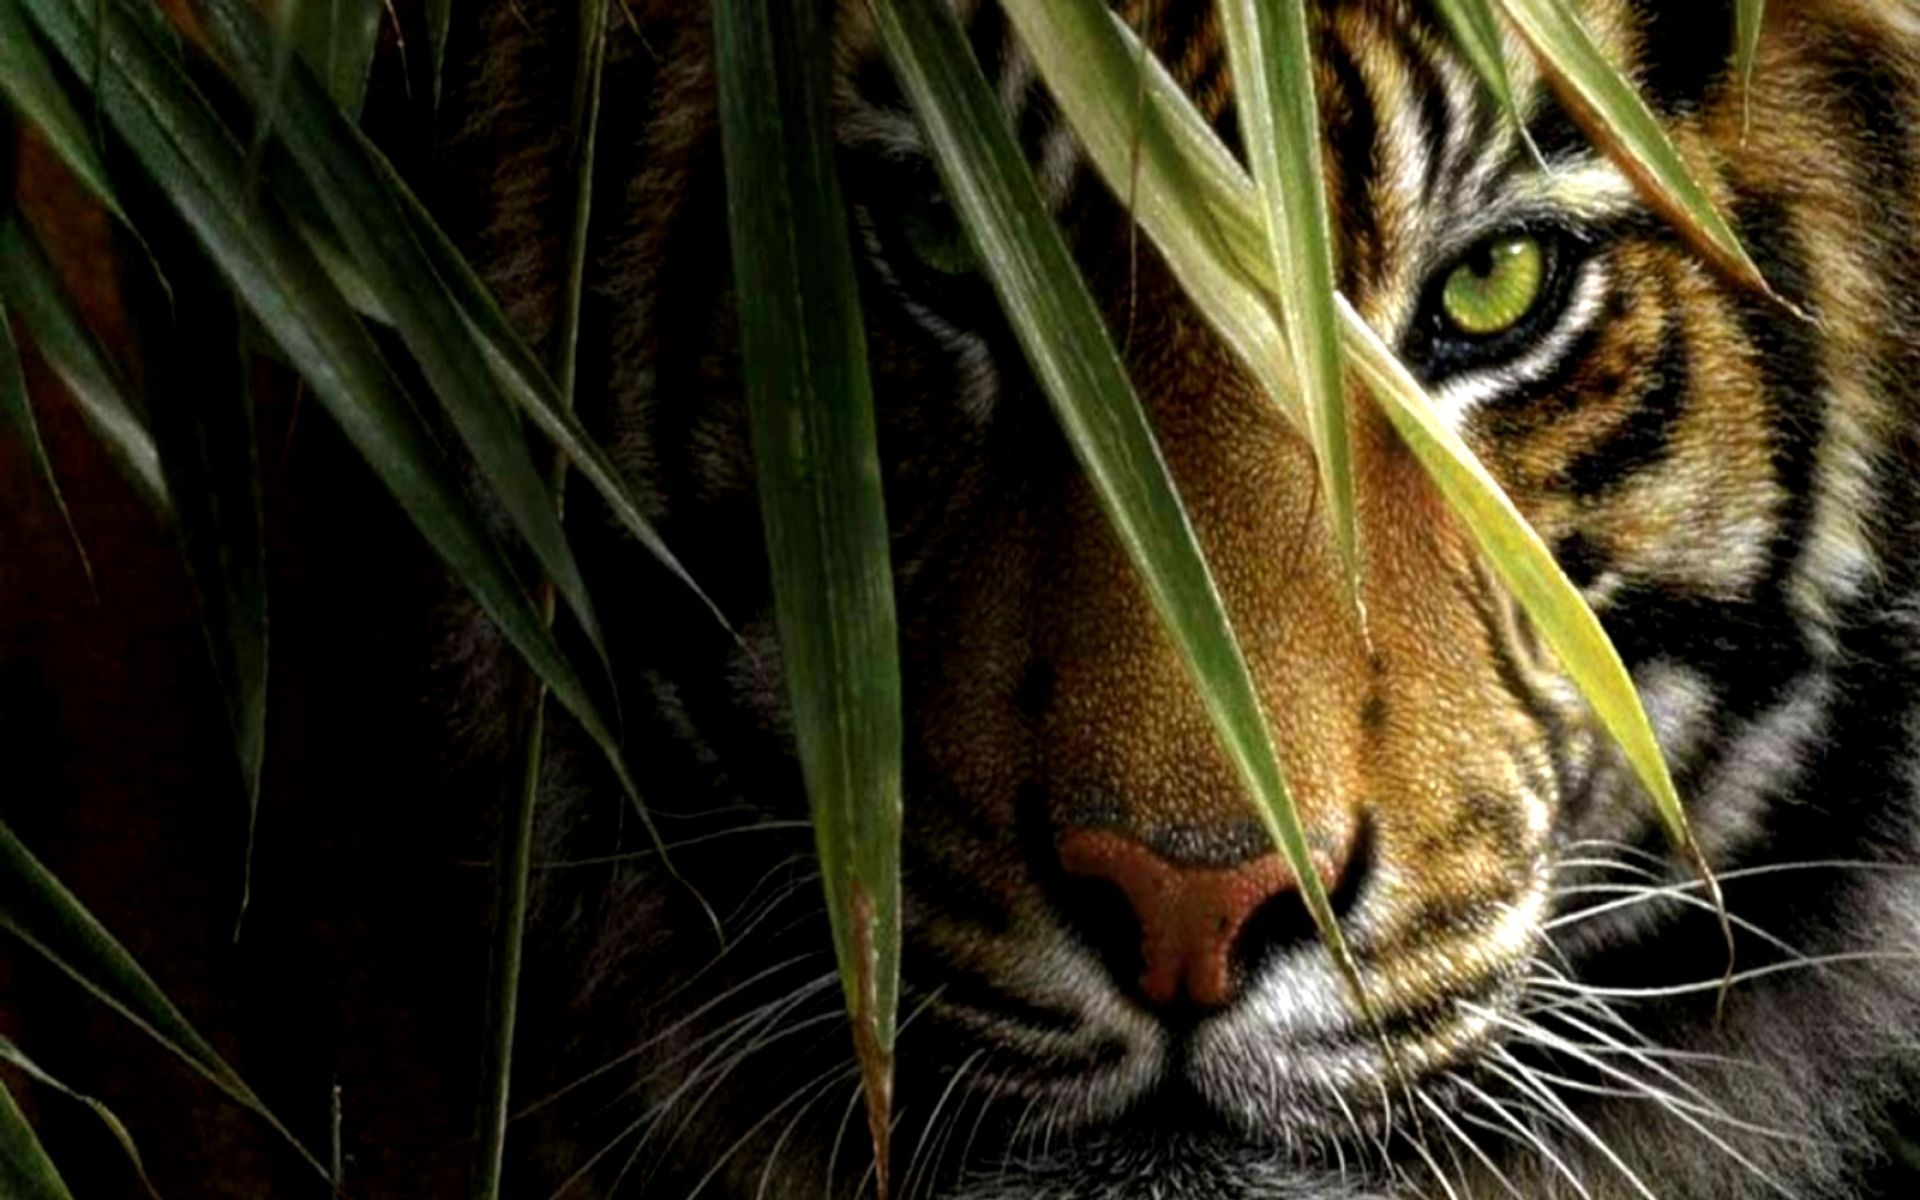 Tiger HD Wallpapers for Mobile and Desktop Background